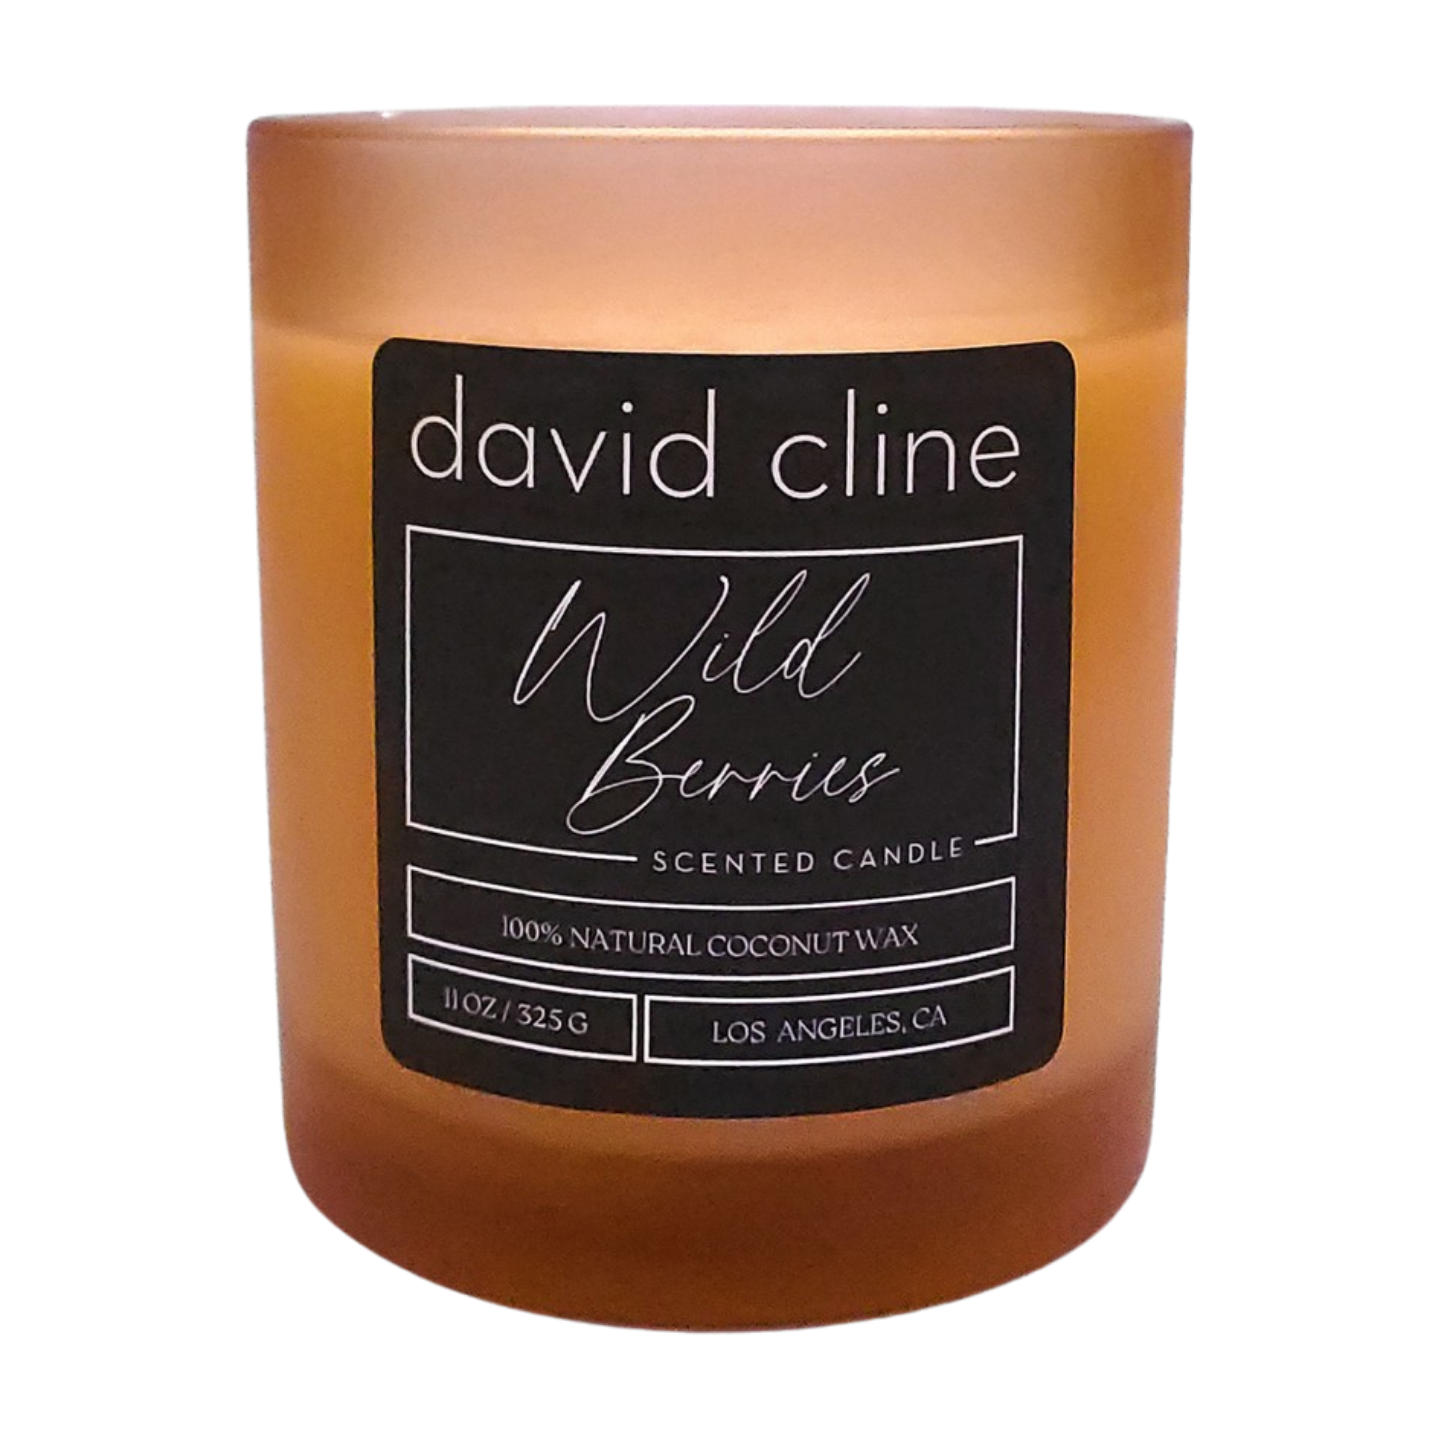 Wild Berries Scented Candle